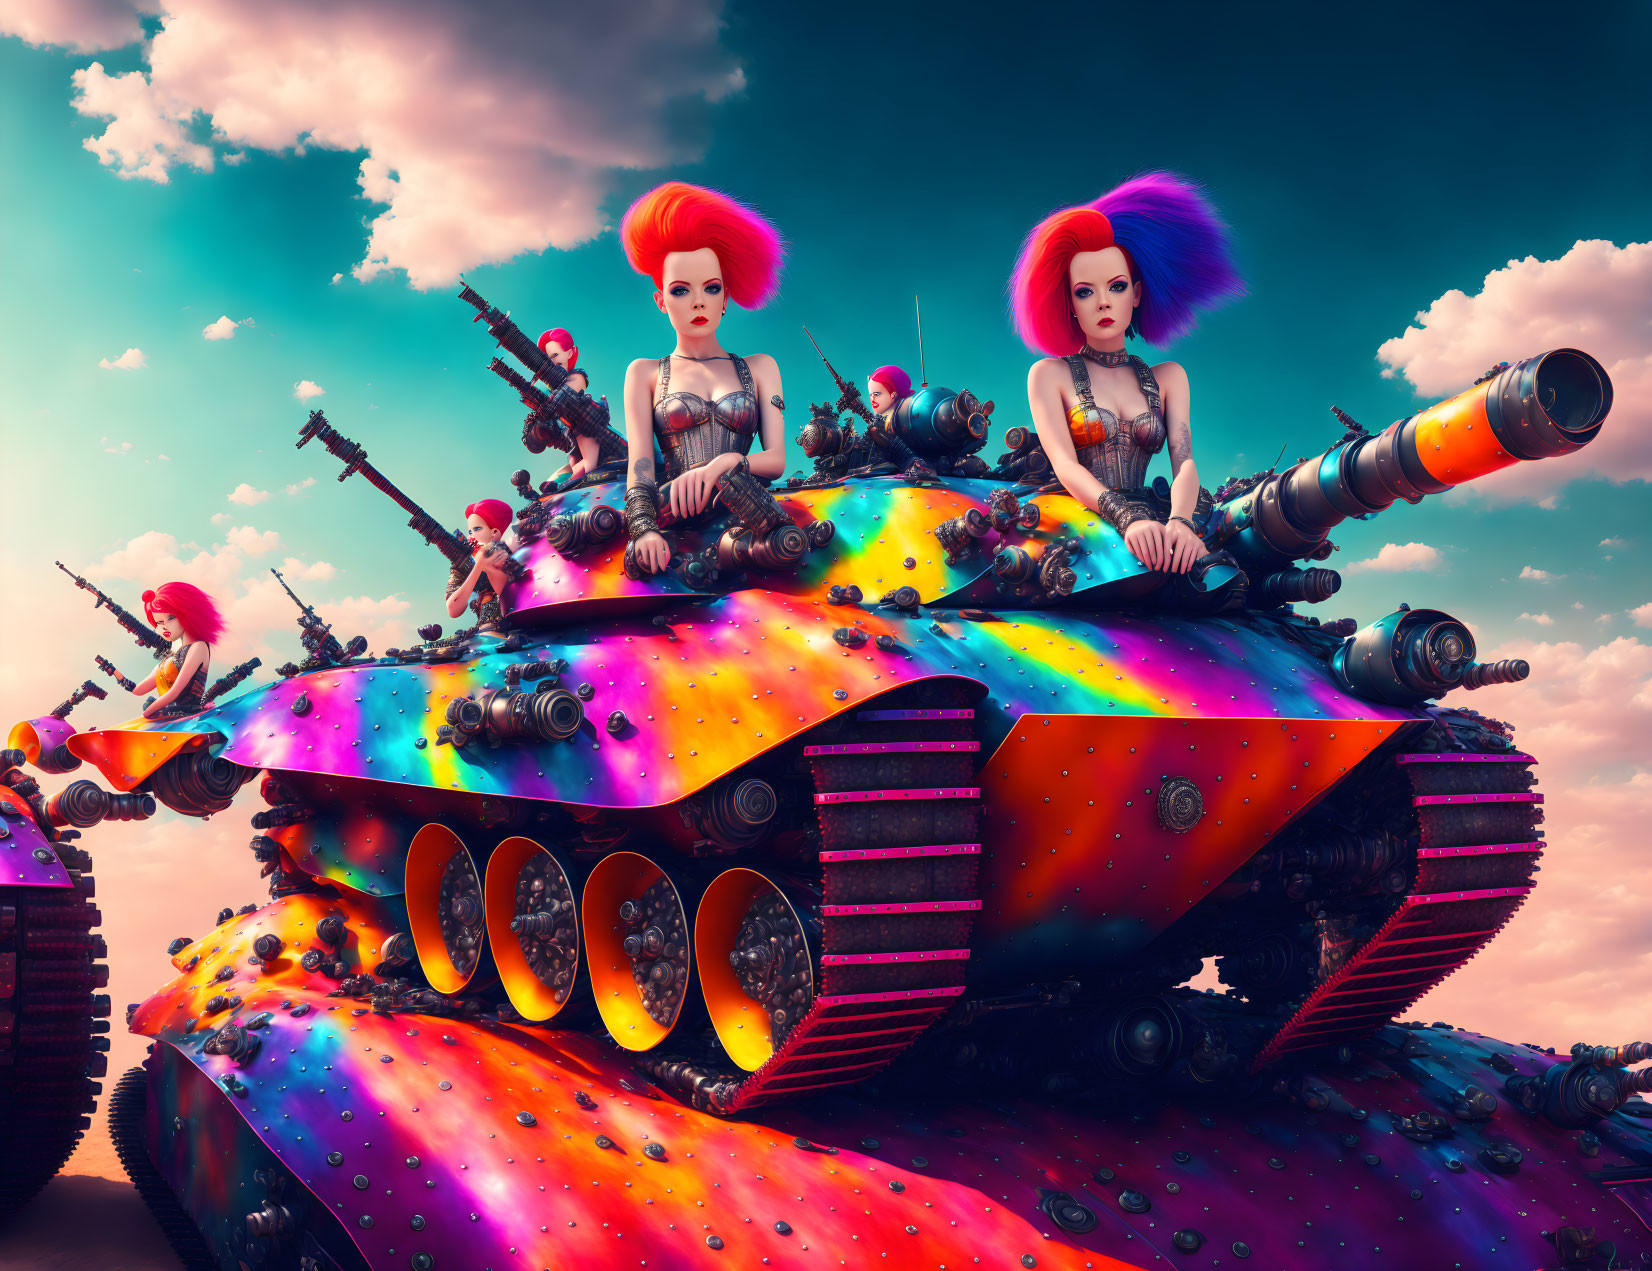 Stylized female figures with colorful hair and tattoos on vibrant tank.